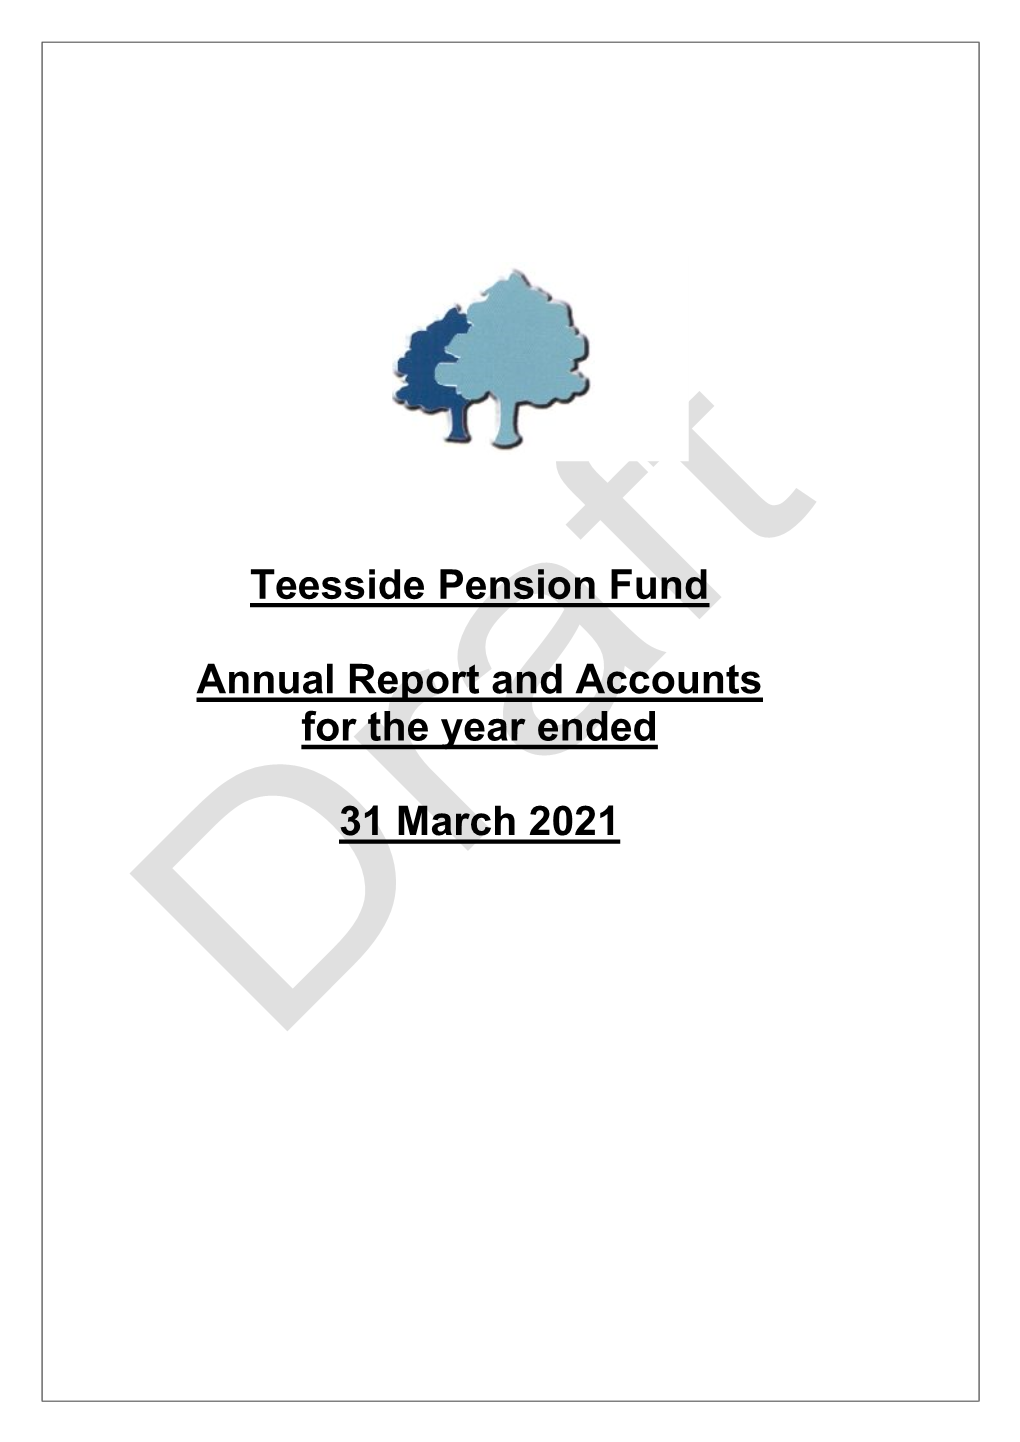 Teesside Pension Fund Annual Report